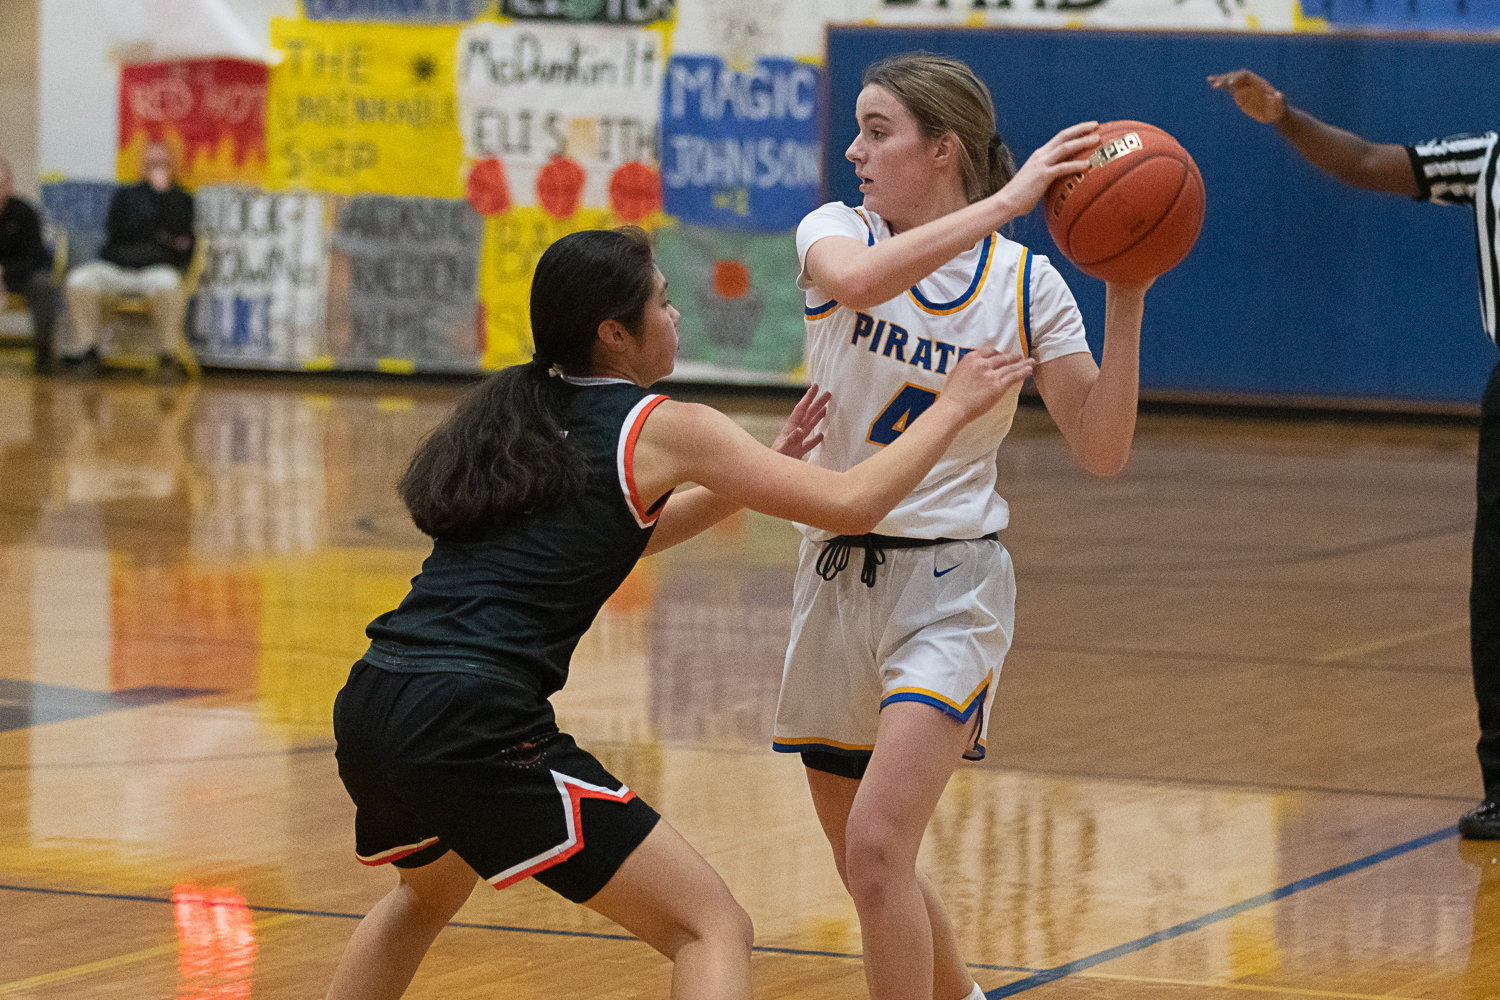 Adna's Brooklyn Loose keeps the ball away from Rainier's Angelica Askey during the first half of the Pirates' 51-47 win over the Mountaineers at home on Jan. 19.